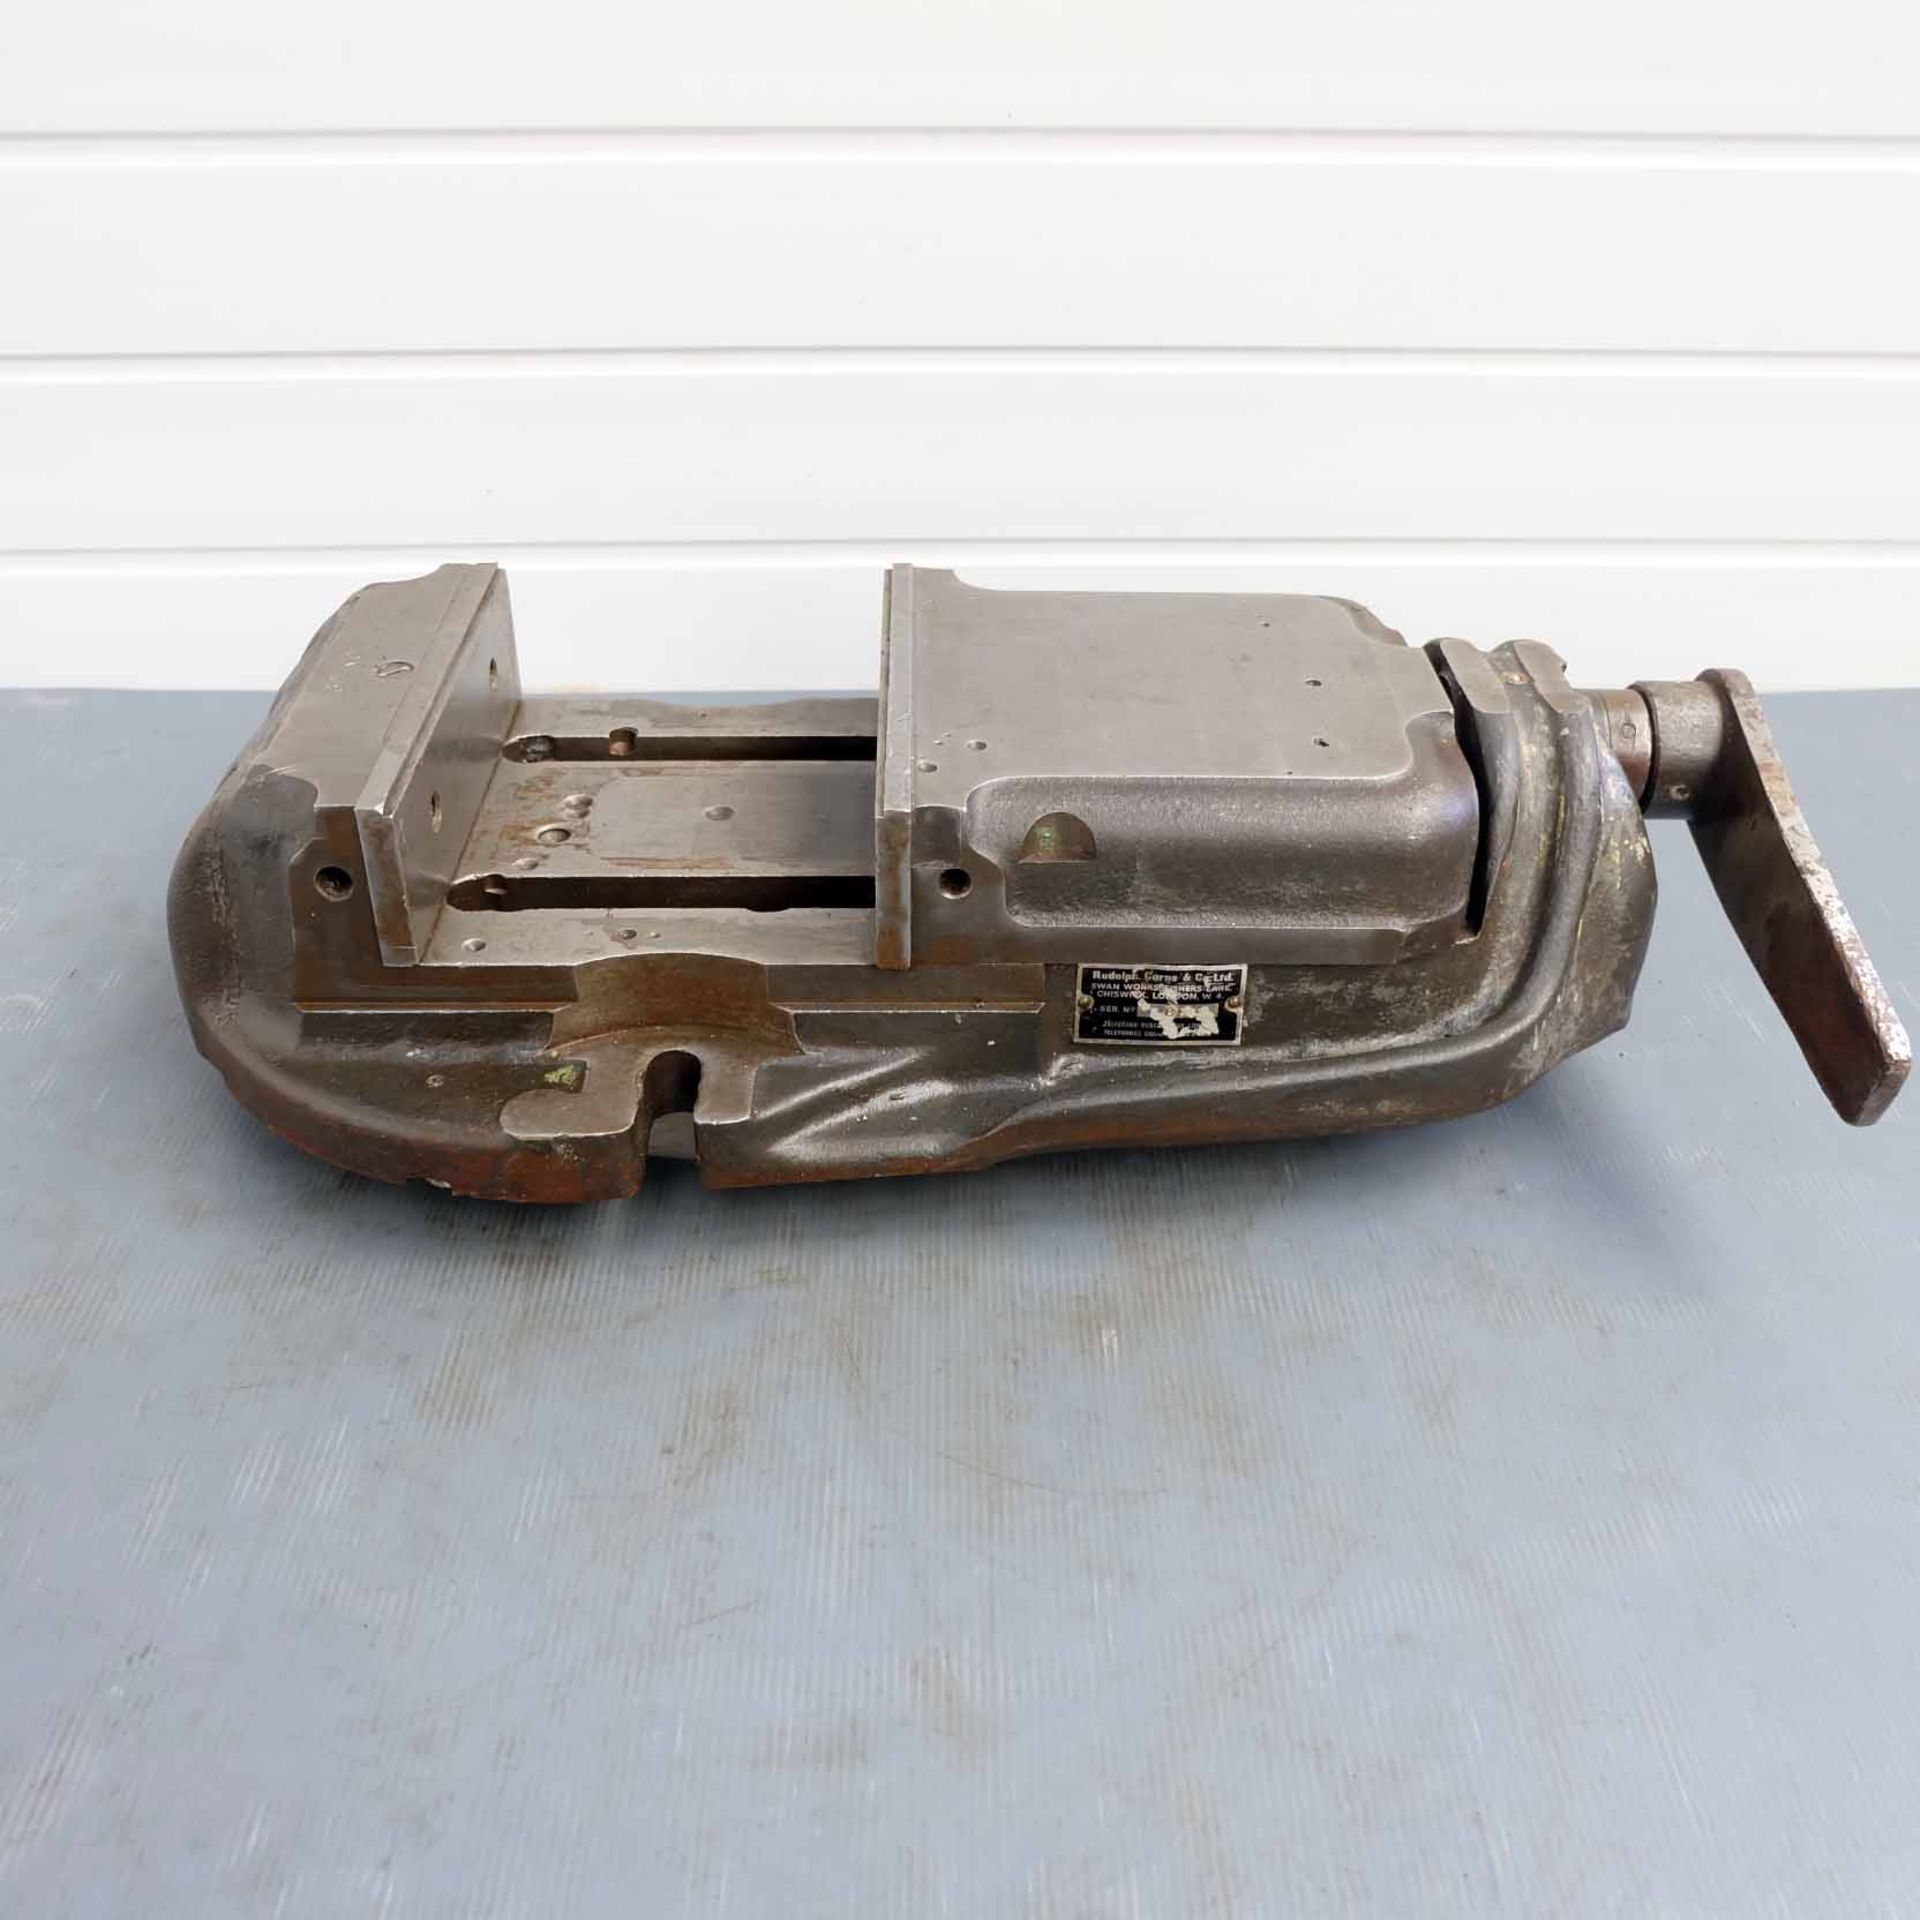 Rudolph Carne 8" Machine Vice. Jaw Width 8". Jaw Height 2 5/6". Max Opening 6". Overall Height 4 5/8